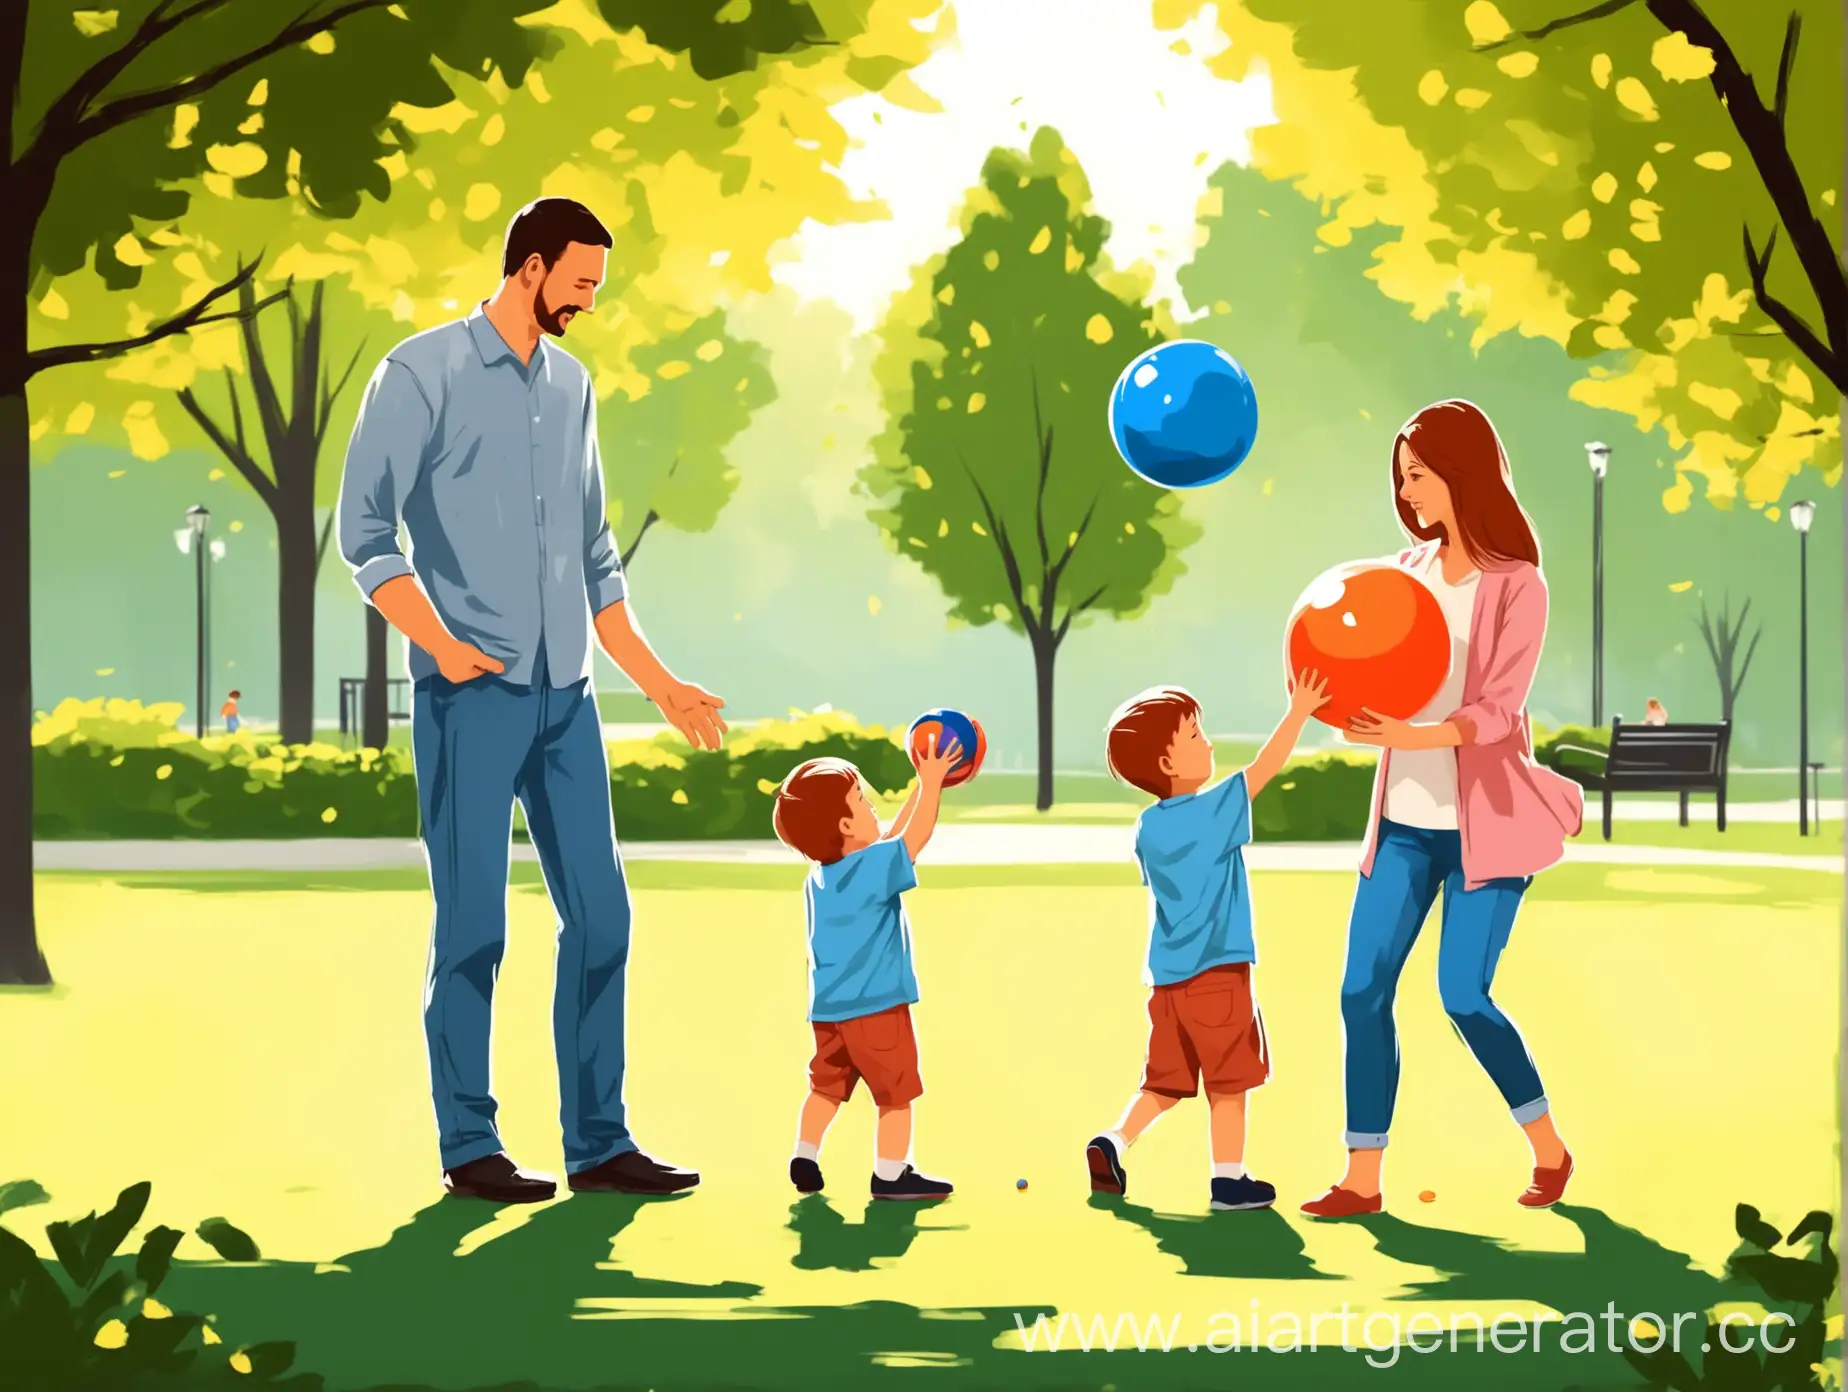 Family-Fun-Playing-Ball-in-the-Park-with-Neighbors